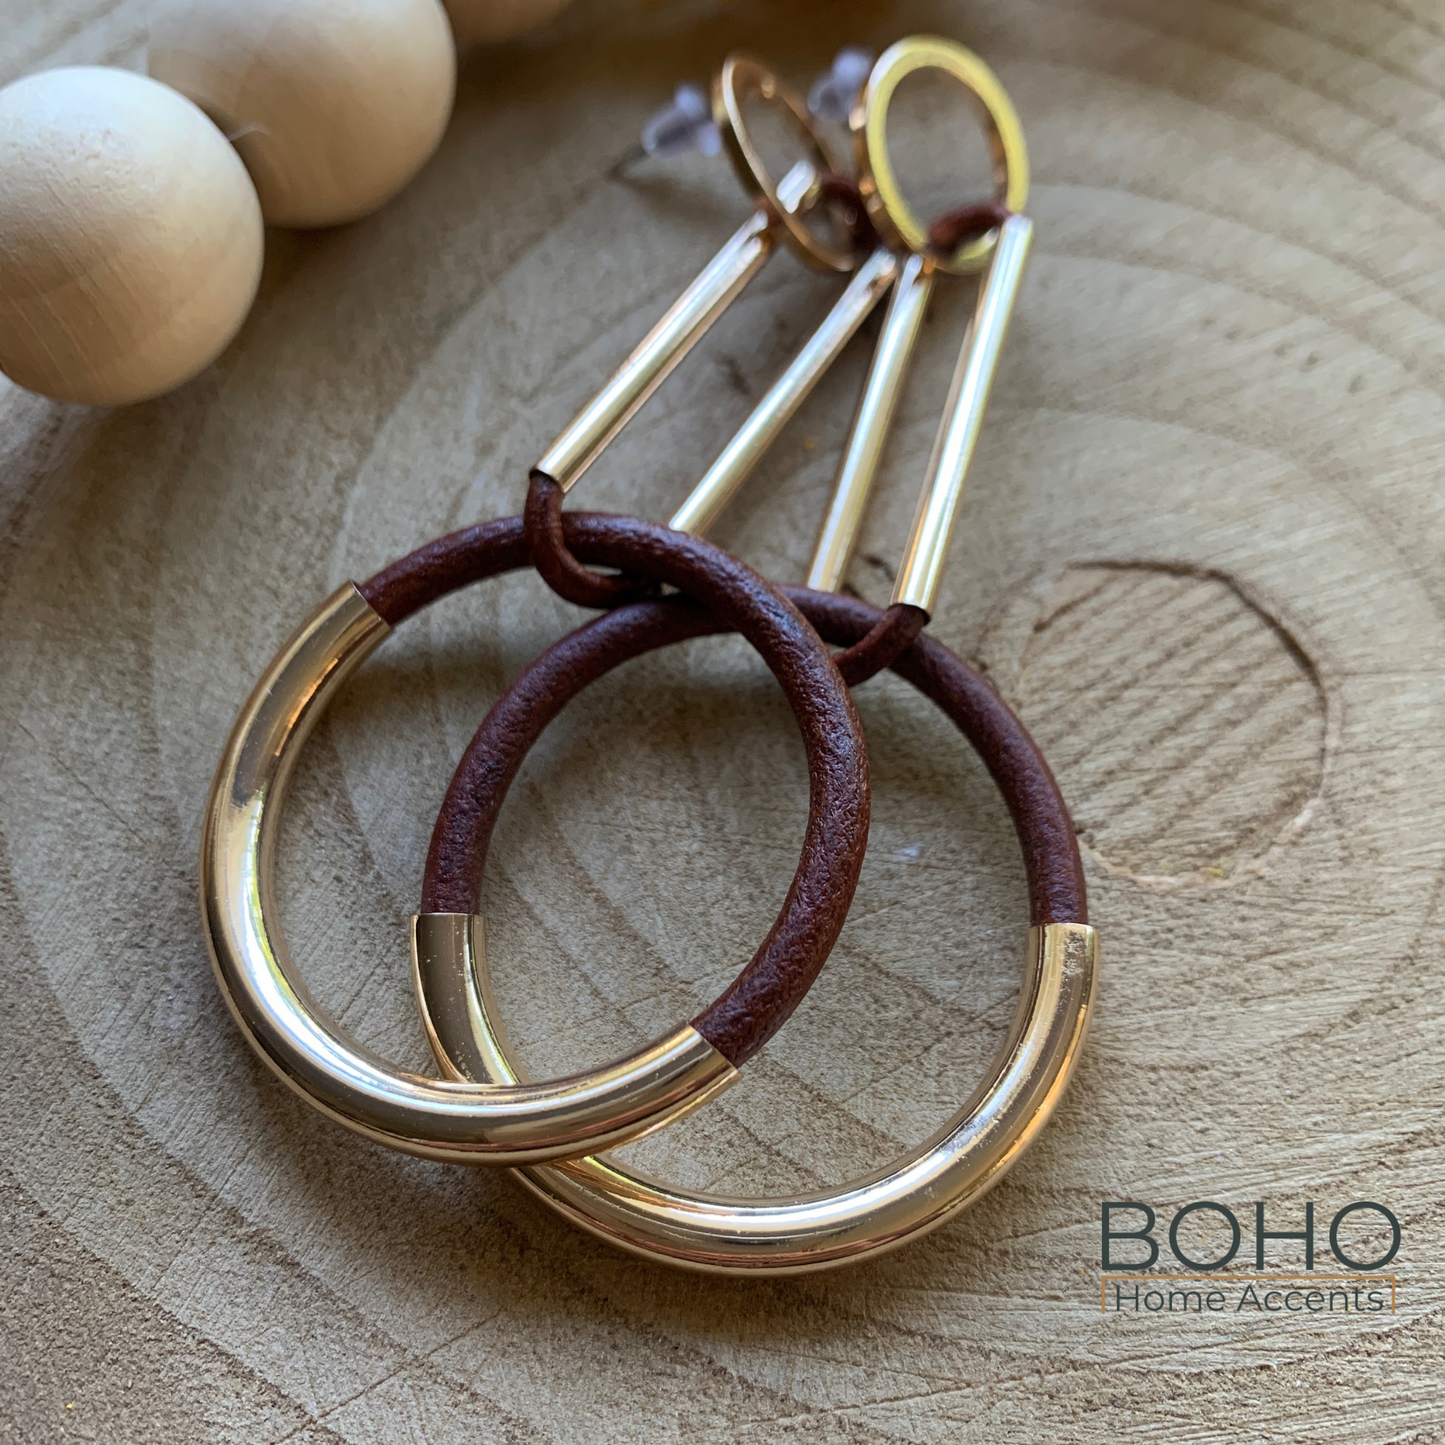 Elegant and Playful Earrings- Boho Gold Accented Wood Earrings, Aretes, Pantallas de Madera | Boho Home Accents